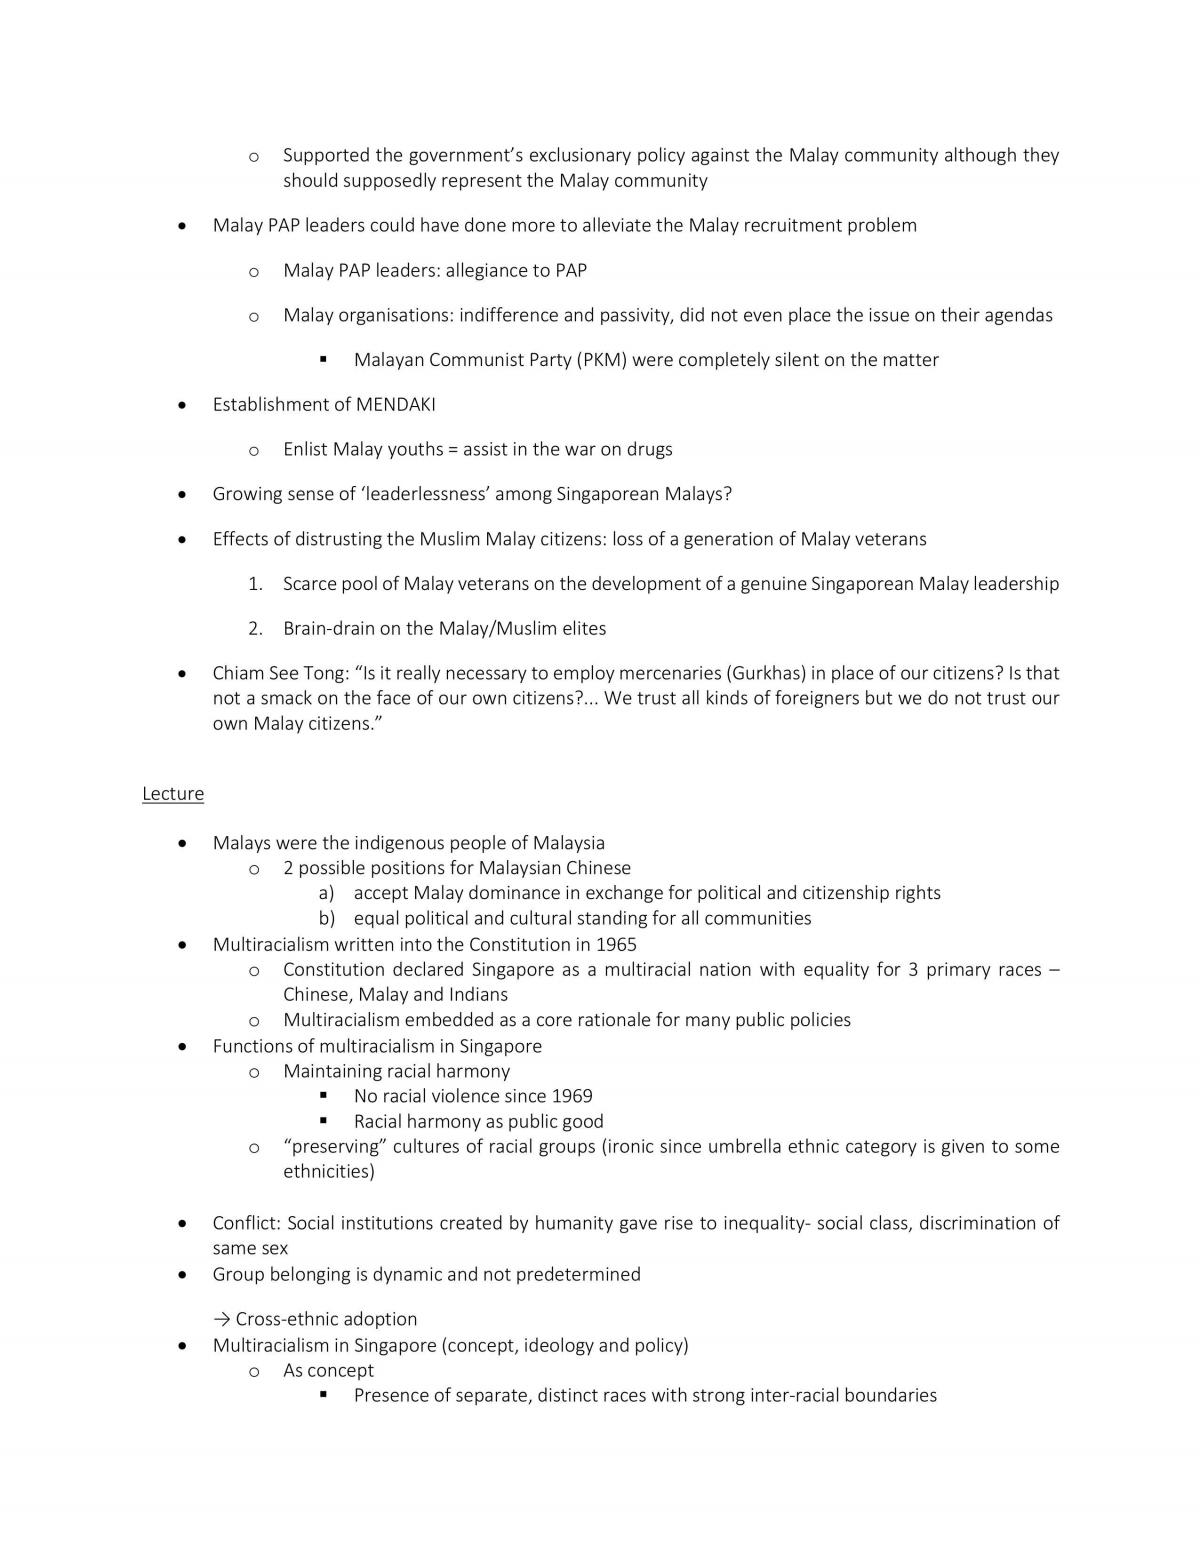 GES1028 Finals Notes - Page 18